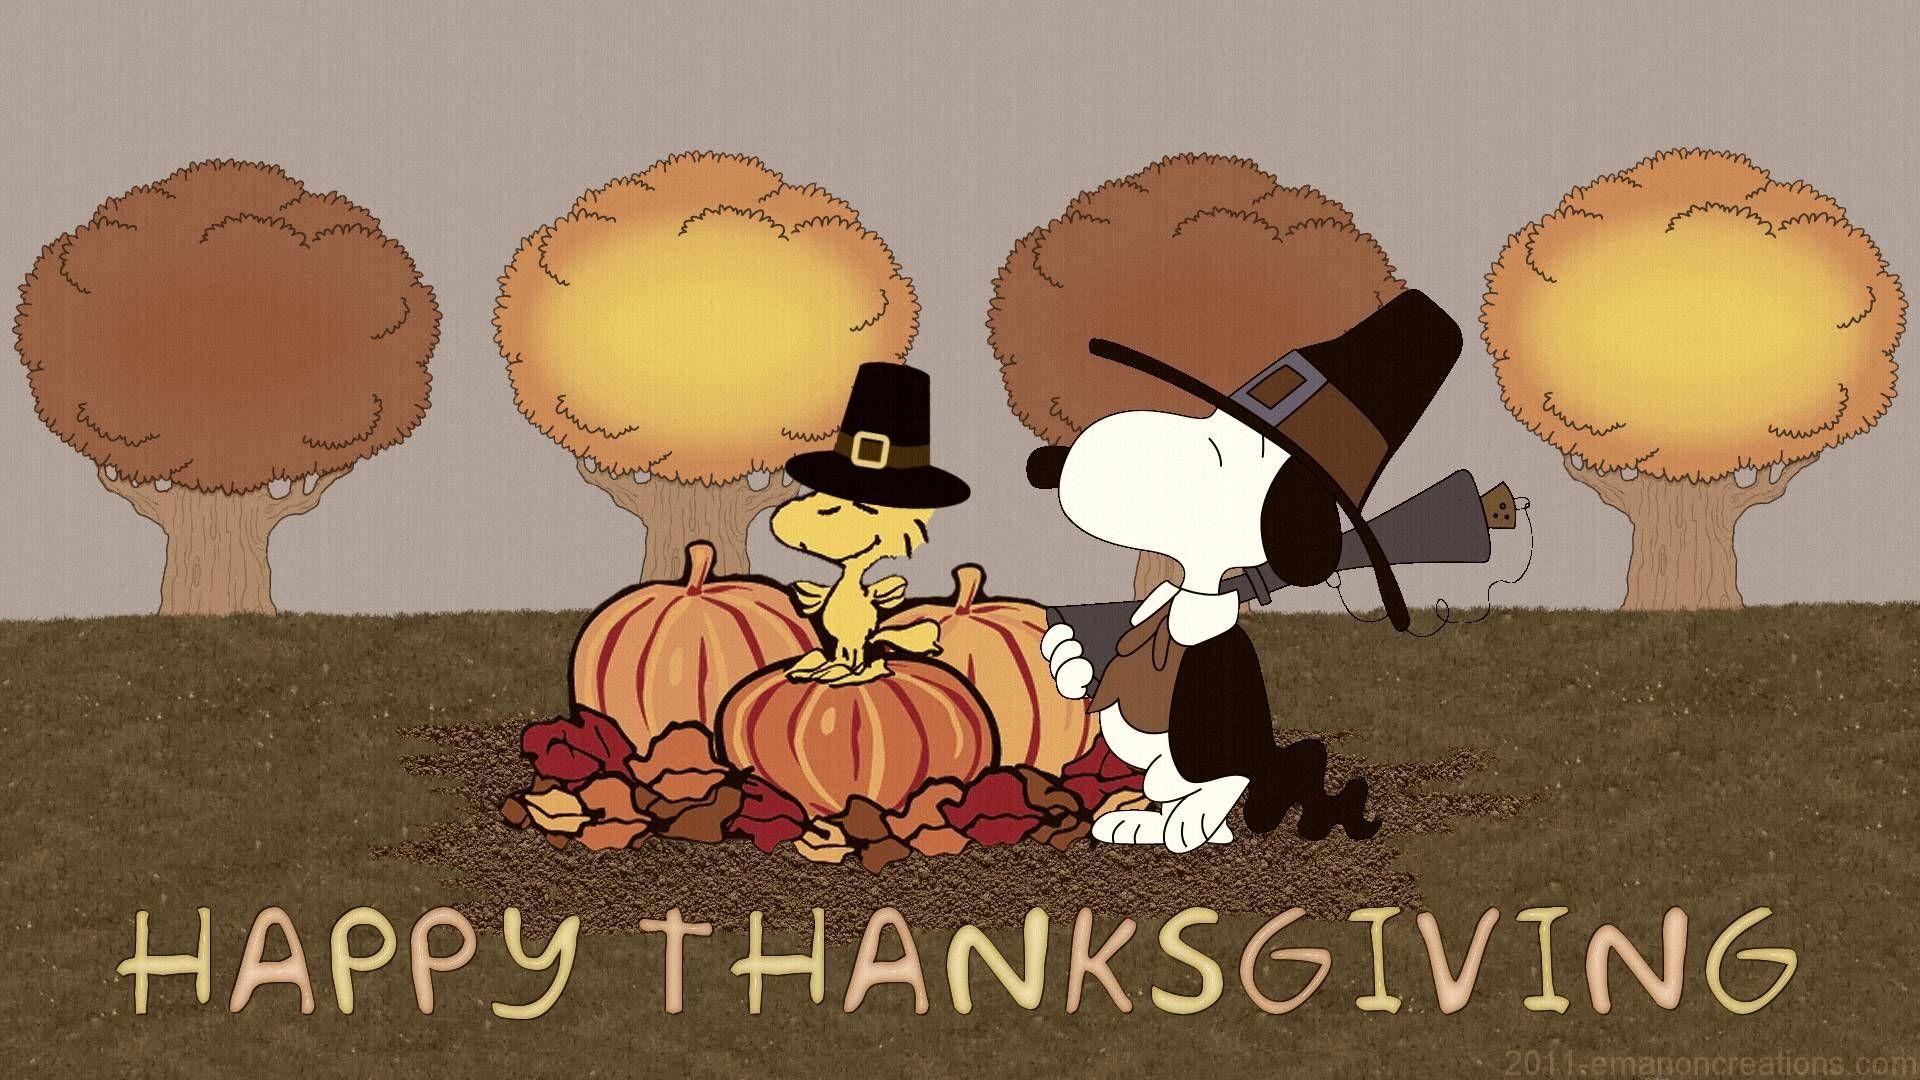 Peanuts Thanksgiving Wallpaper background picture